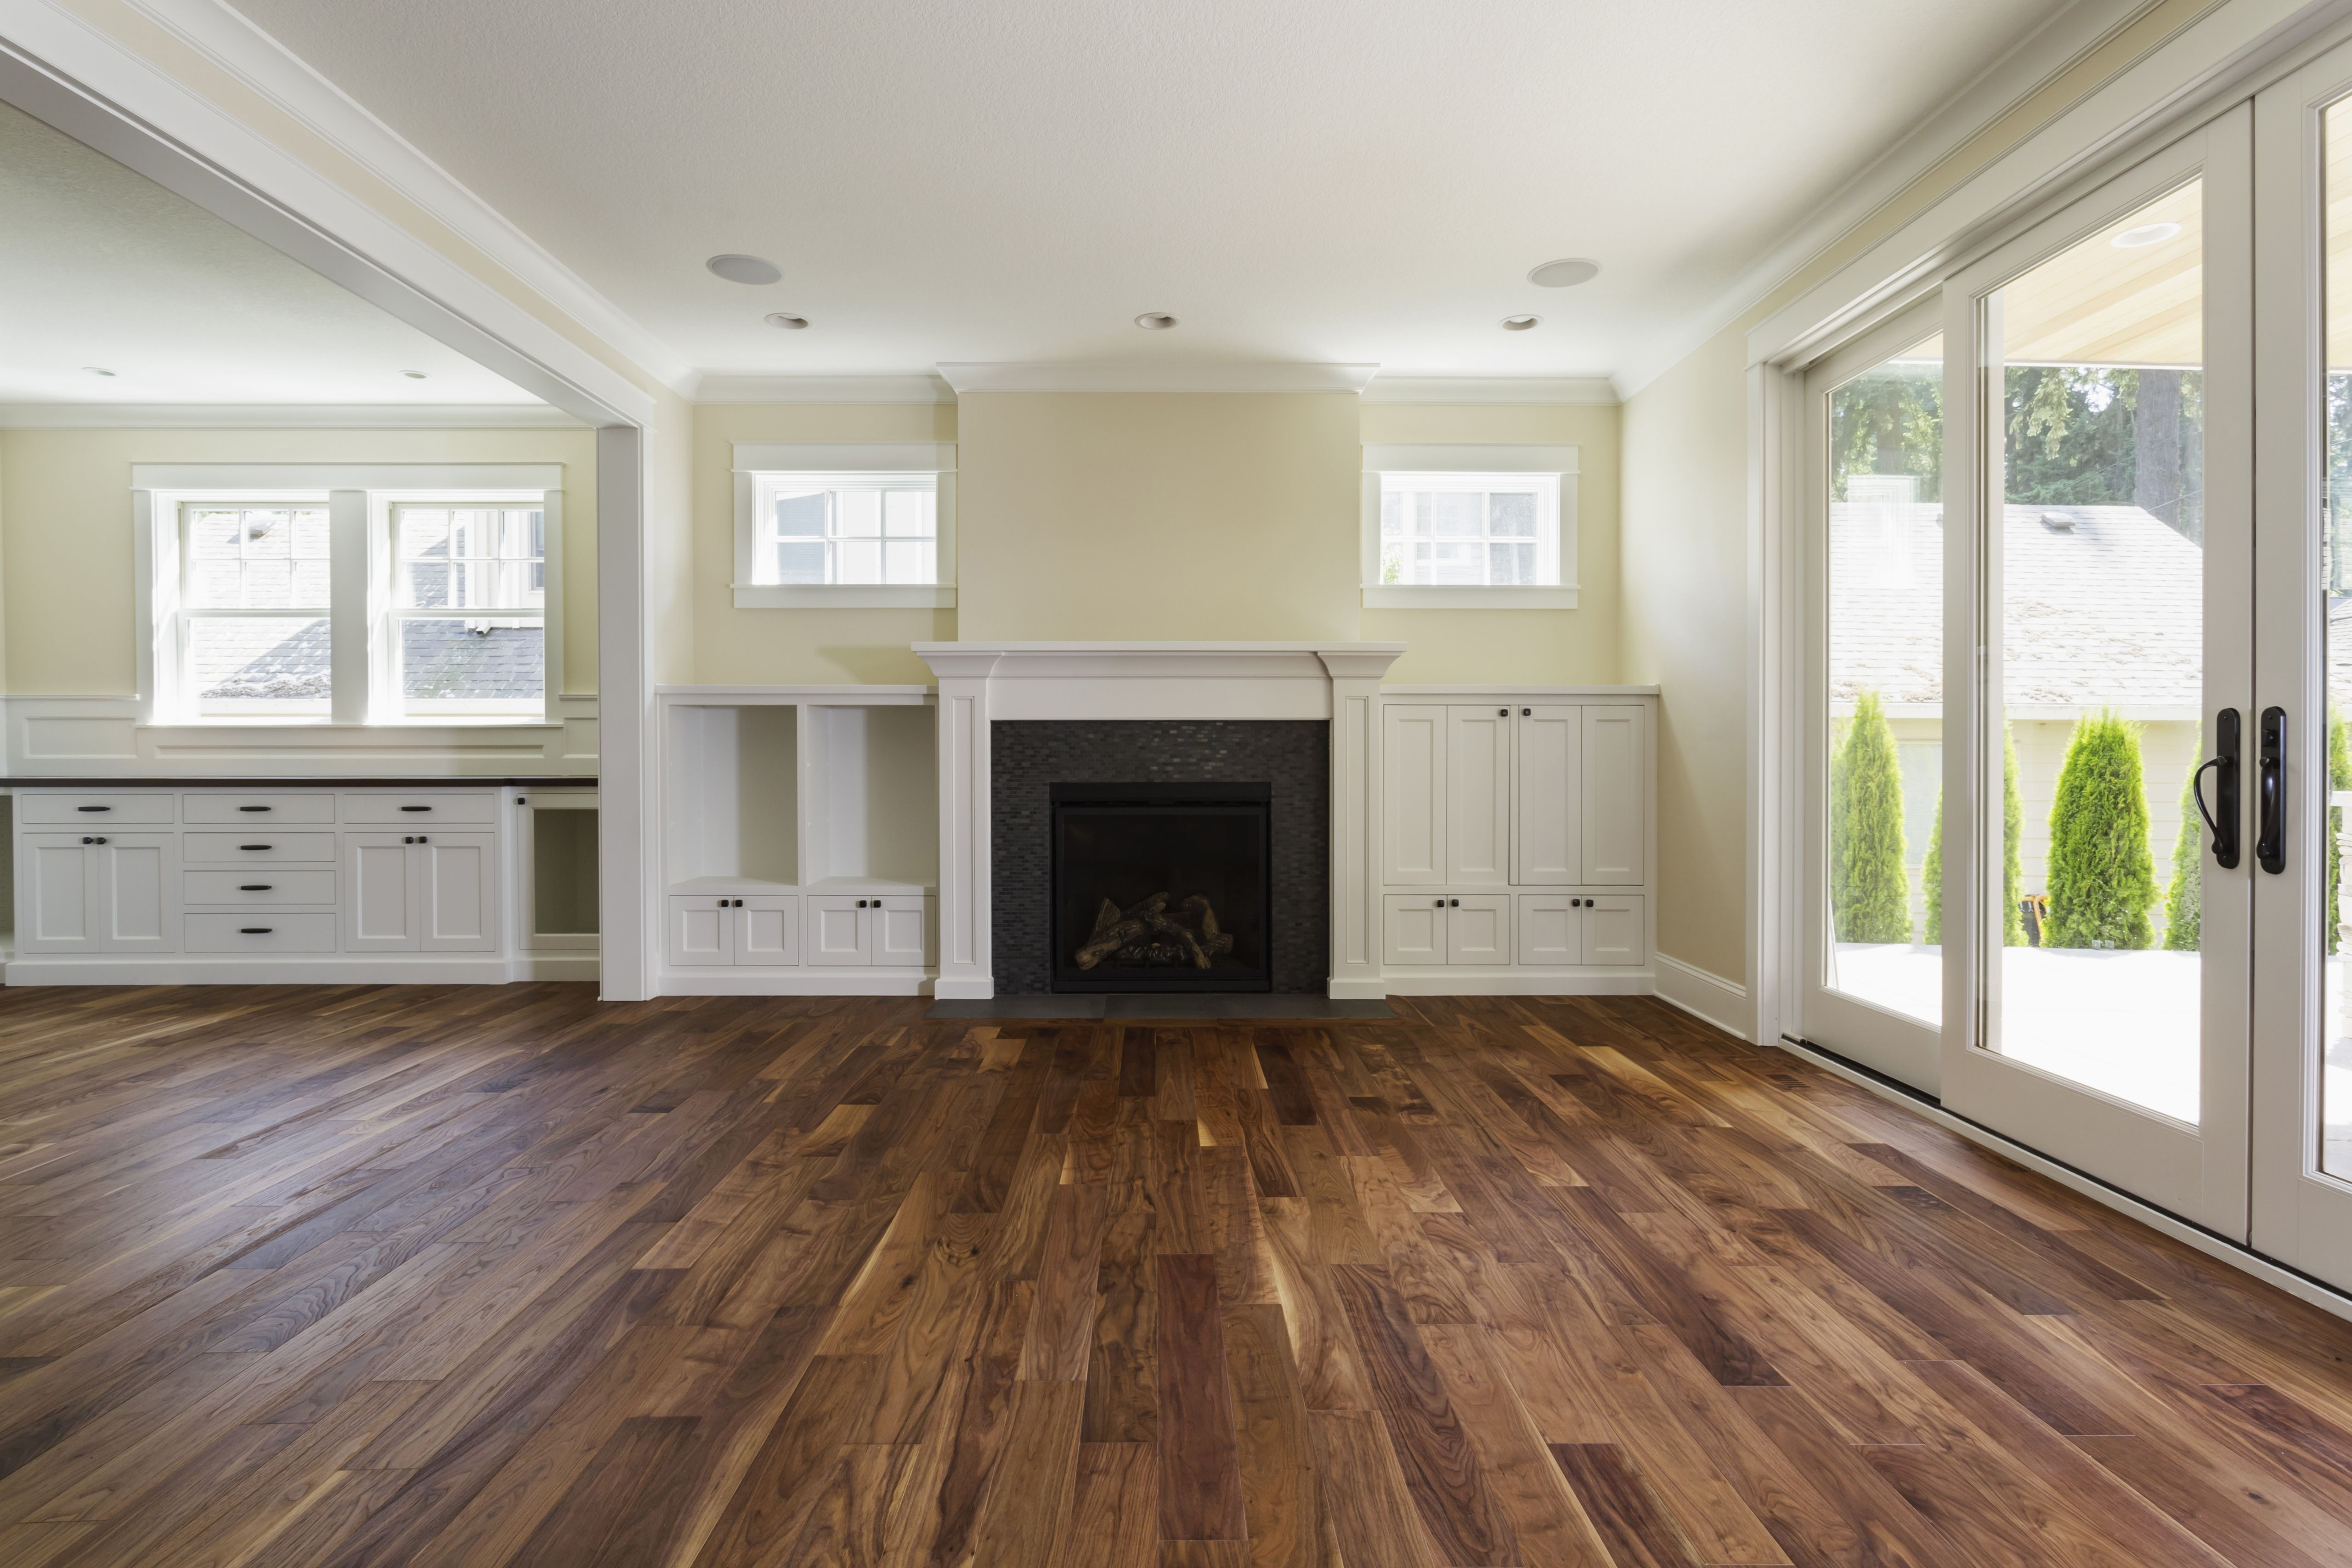 19 Unique Types Of Wood Used for Hardwood Flooring 2024 free download types of wood used for hardwood flooring of the pros and cons of prefinished hardwood flooring throughout fireplace and built in shelves in living room 482143011 57bef8e33df78cc16e035397